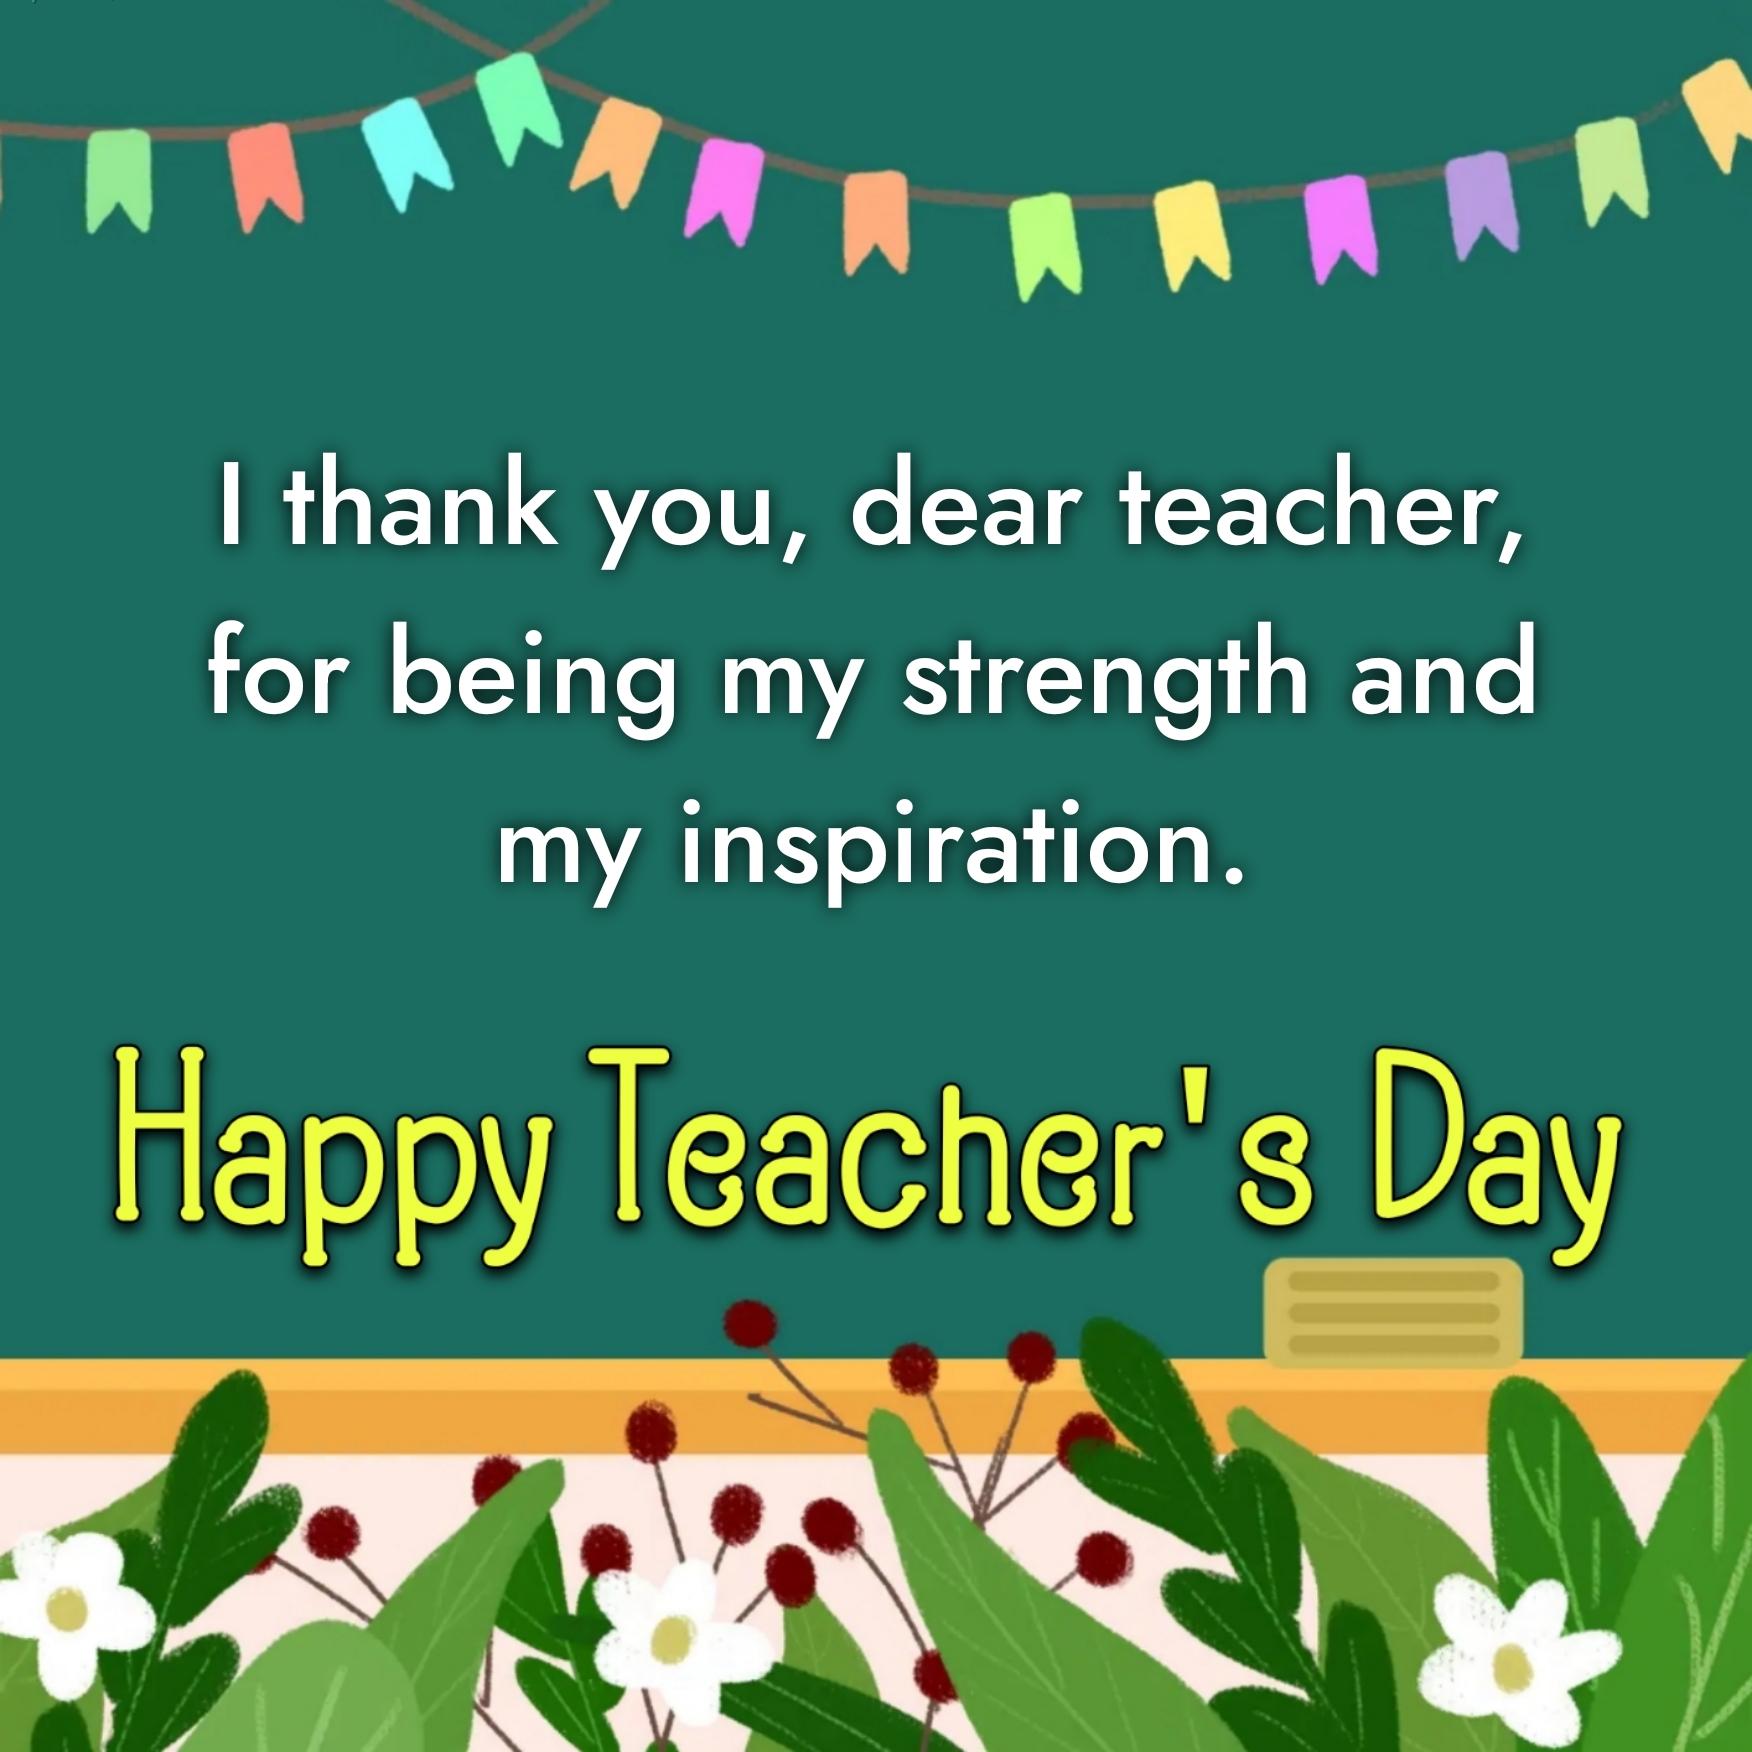 I thank you dear teacher for being my strength and my inspiration